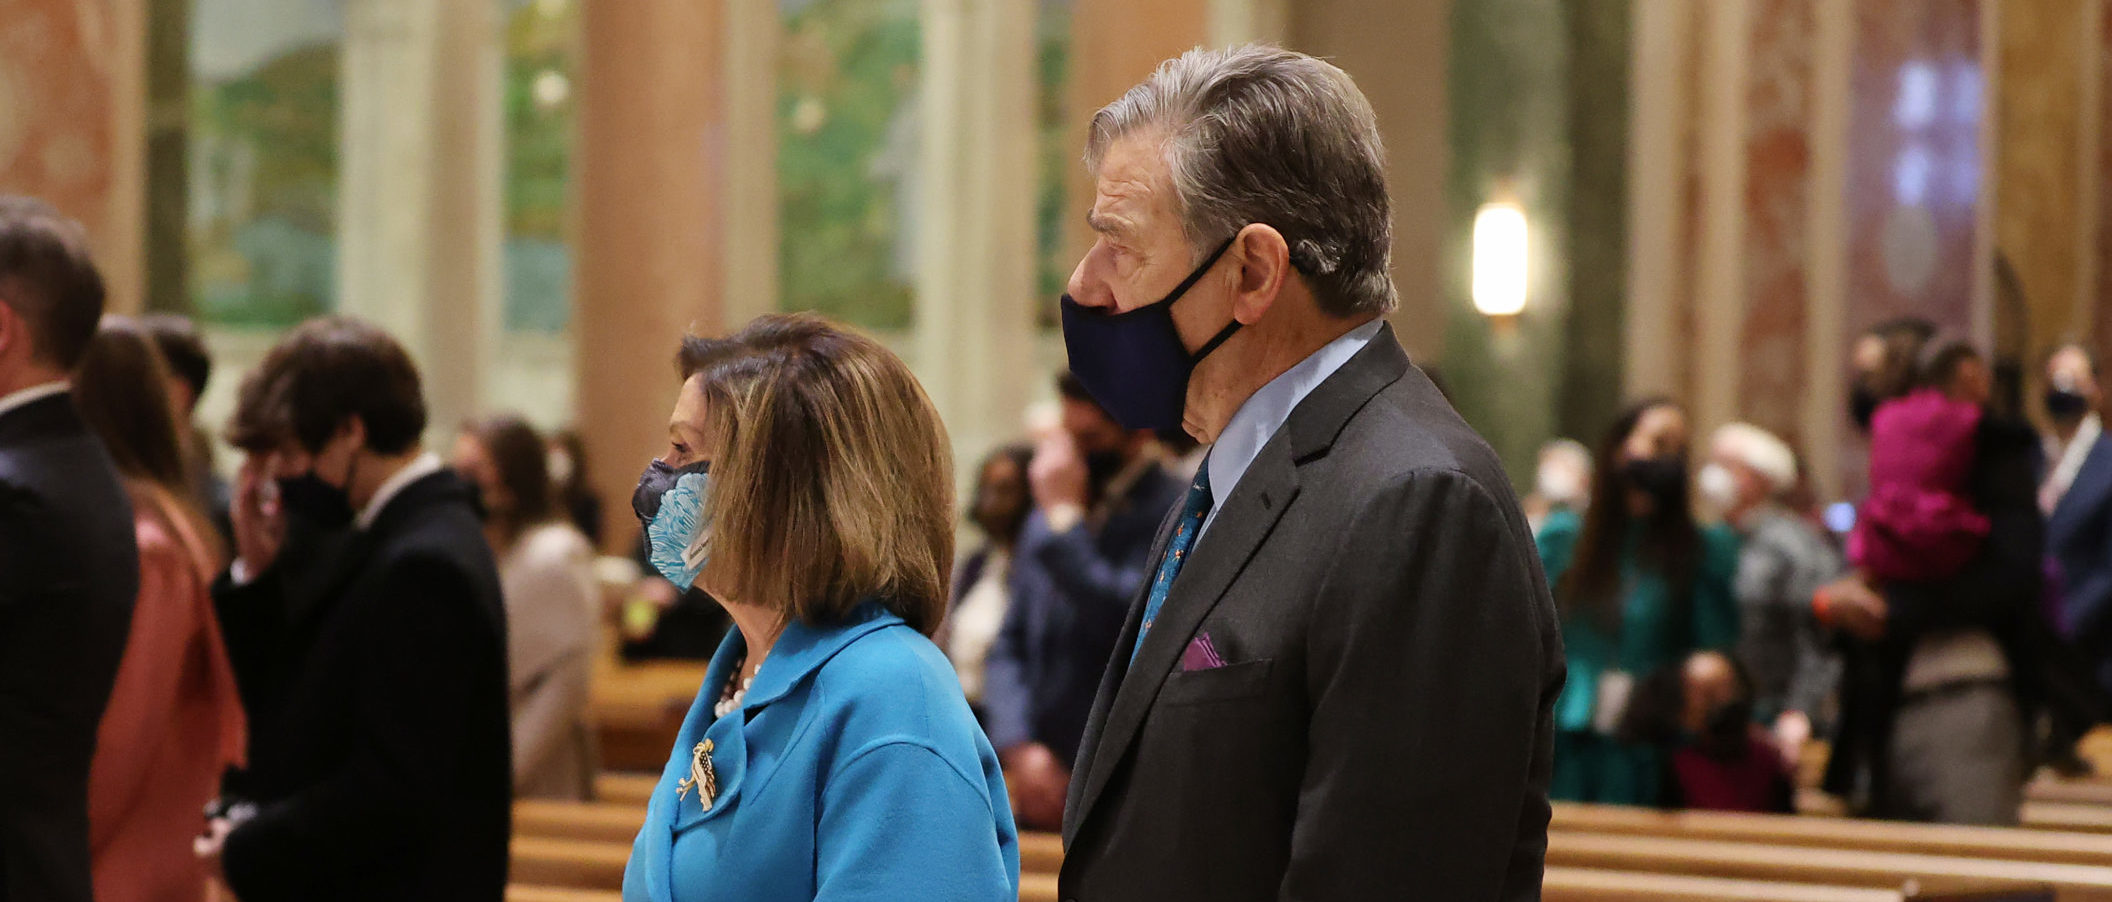 WASHINGTON, DC - JANUARY 20: U.S. House Speaker Nancy Pelosi and her husband Paul Pelosi attend services at the Cathedral of St. Matthew the Apostle with Congressional leaders prior the 59th Presidential Inauguration ceremony on January 20, 2021 in Washington, DC. During today's inauguration ceremony Joe Biden becomes the 46th president of the United States. (Photo by Chip Somodevilla/Getty Images)